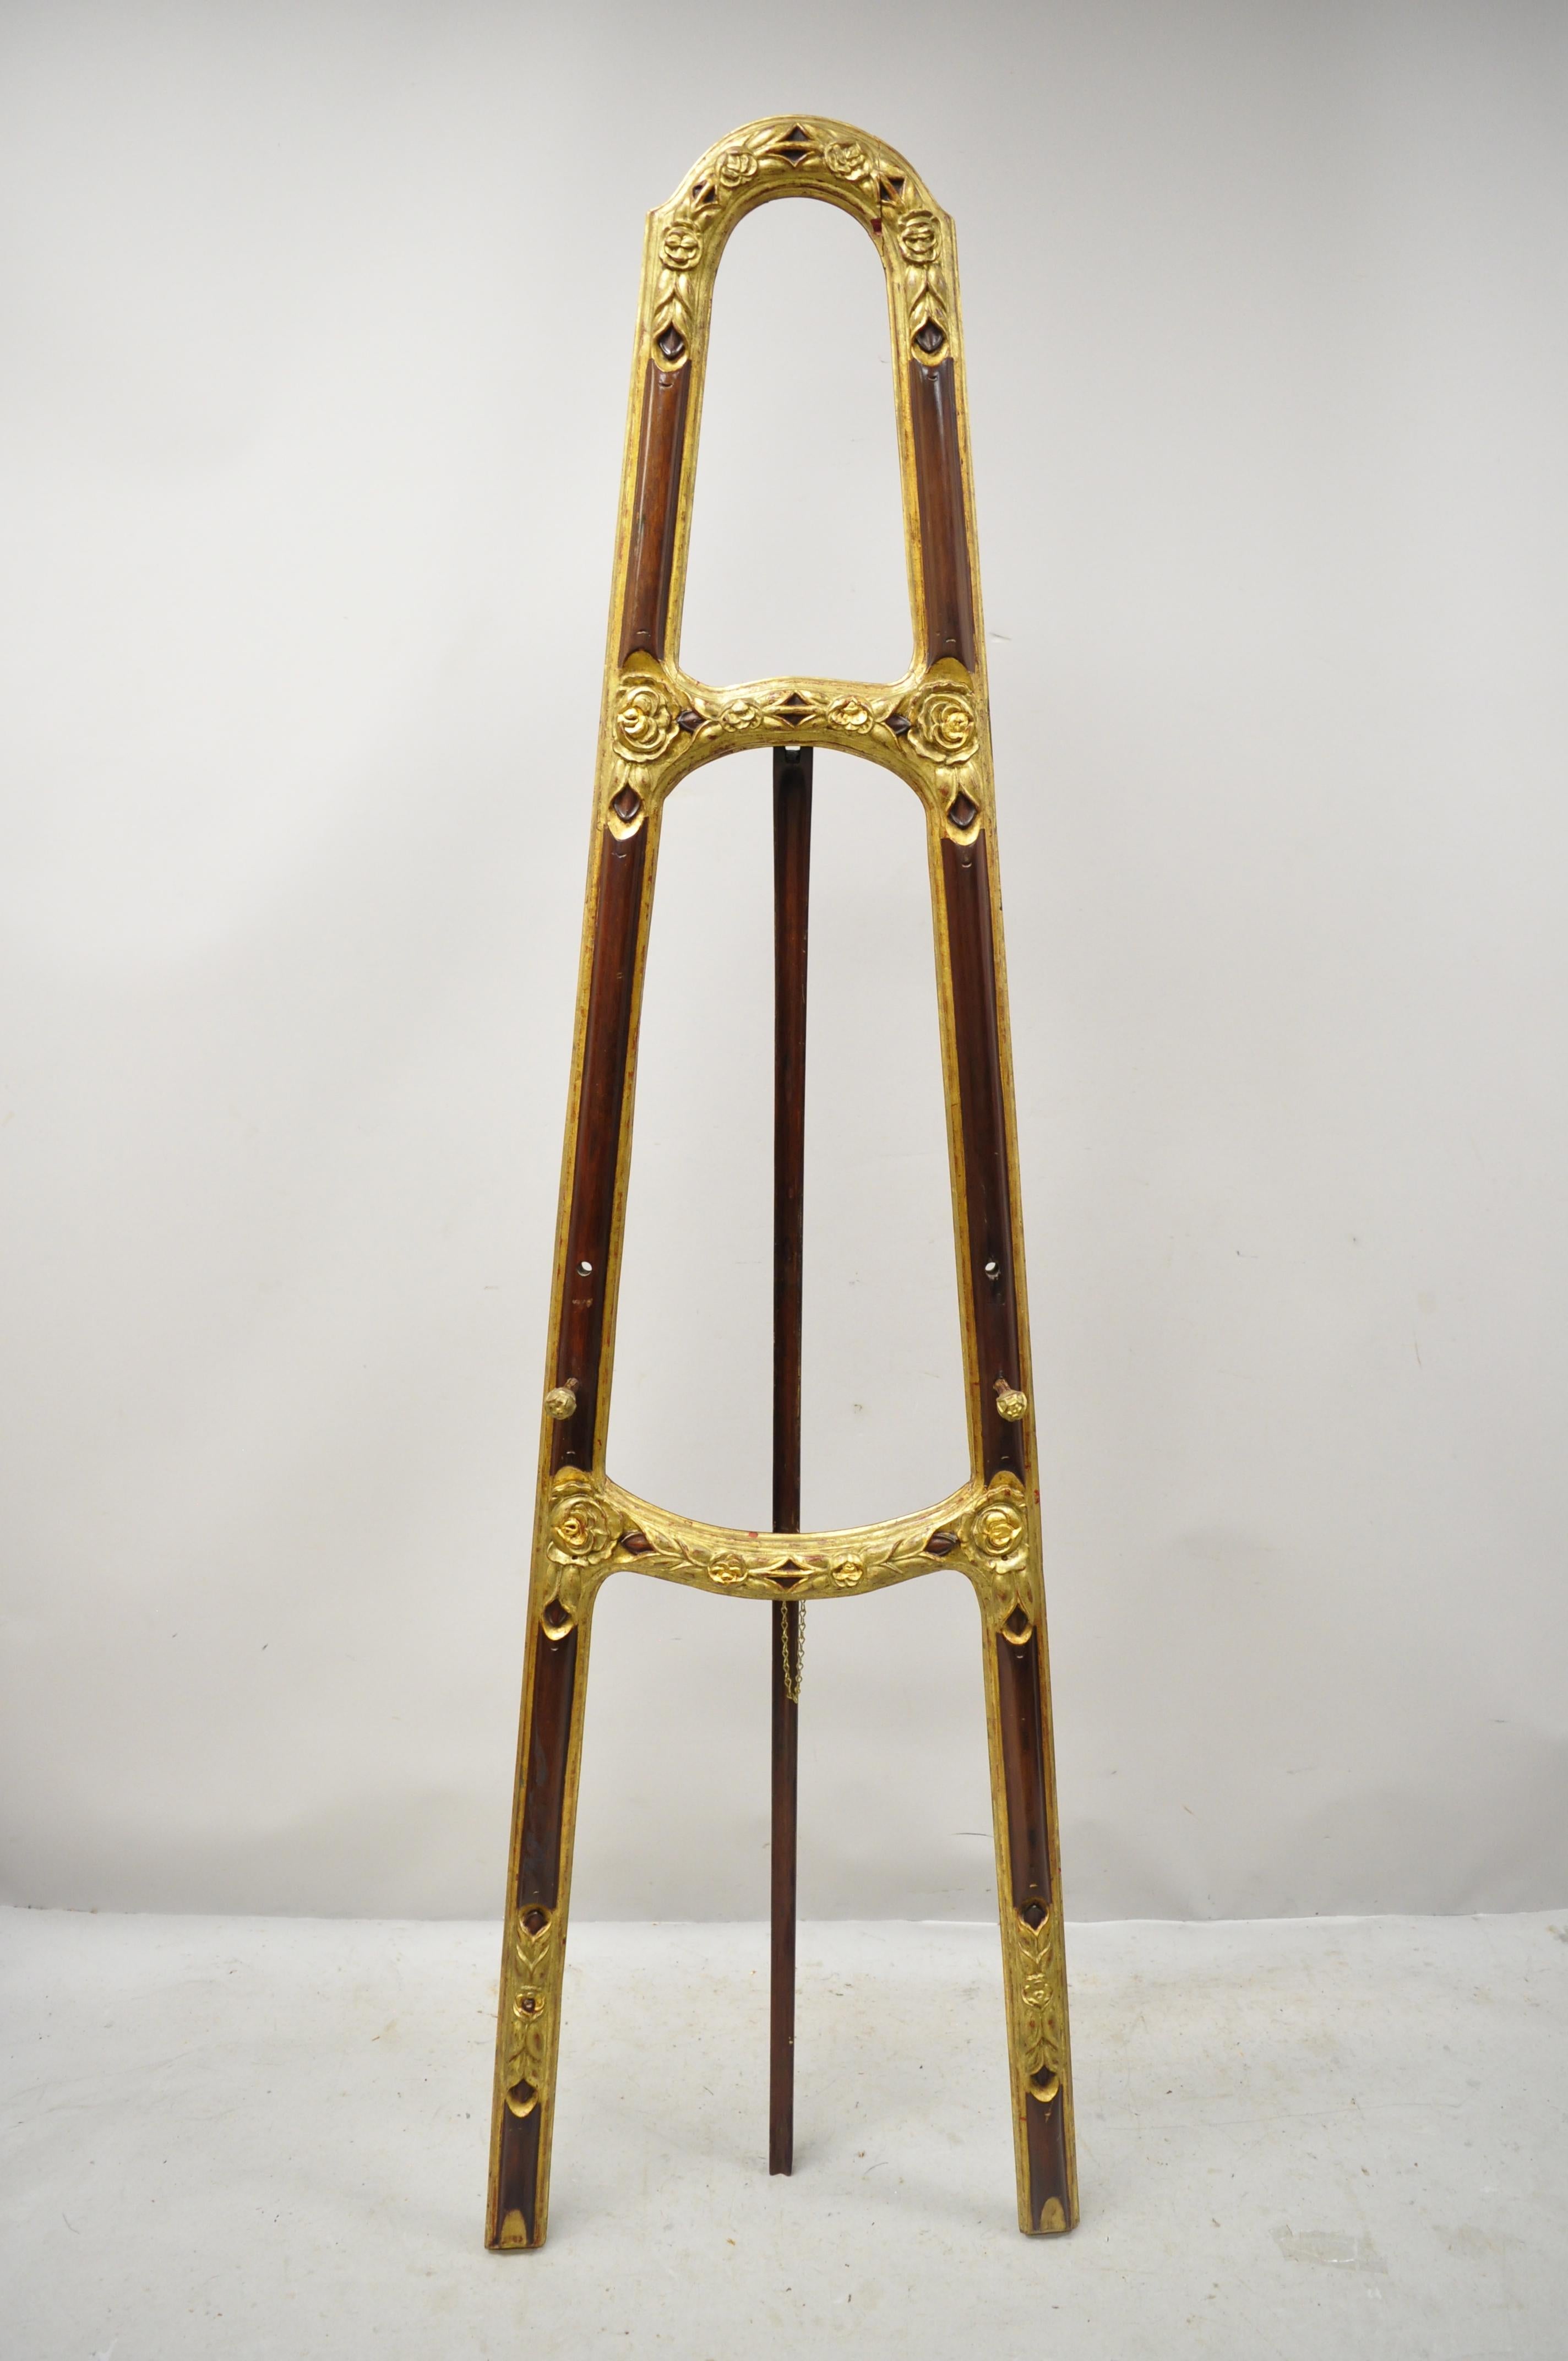 Antique Italian Carved Wood Easel Gold Gilt French Art Painting Stand Display 4